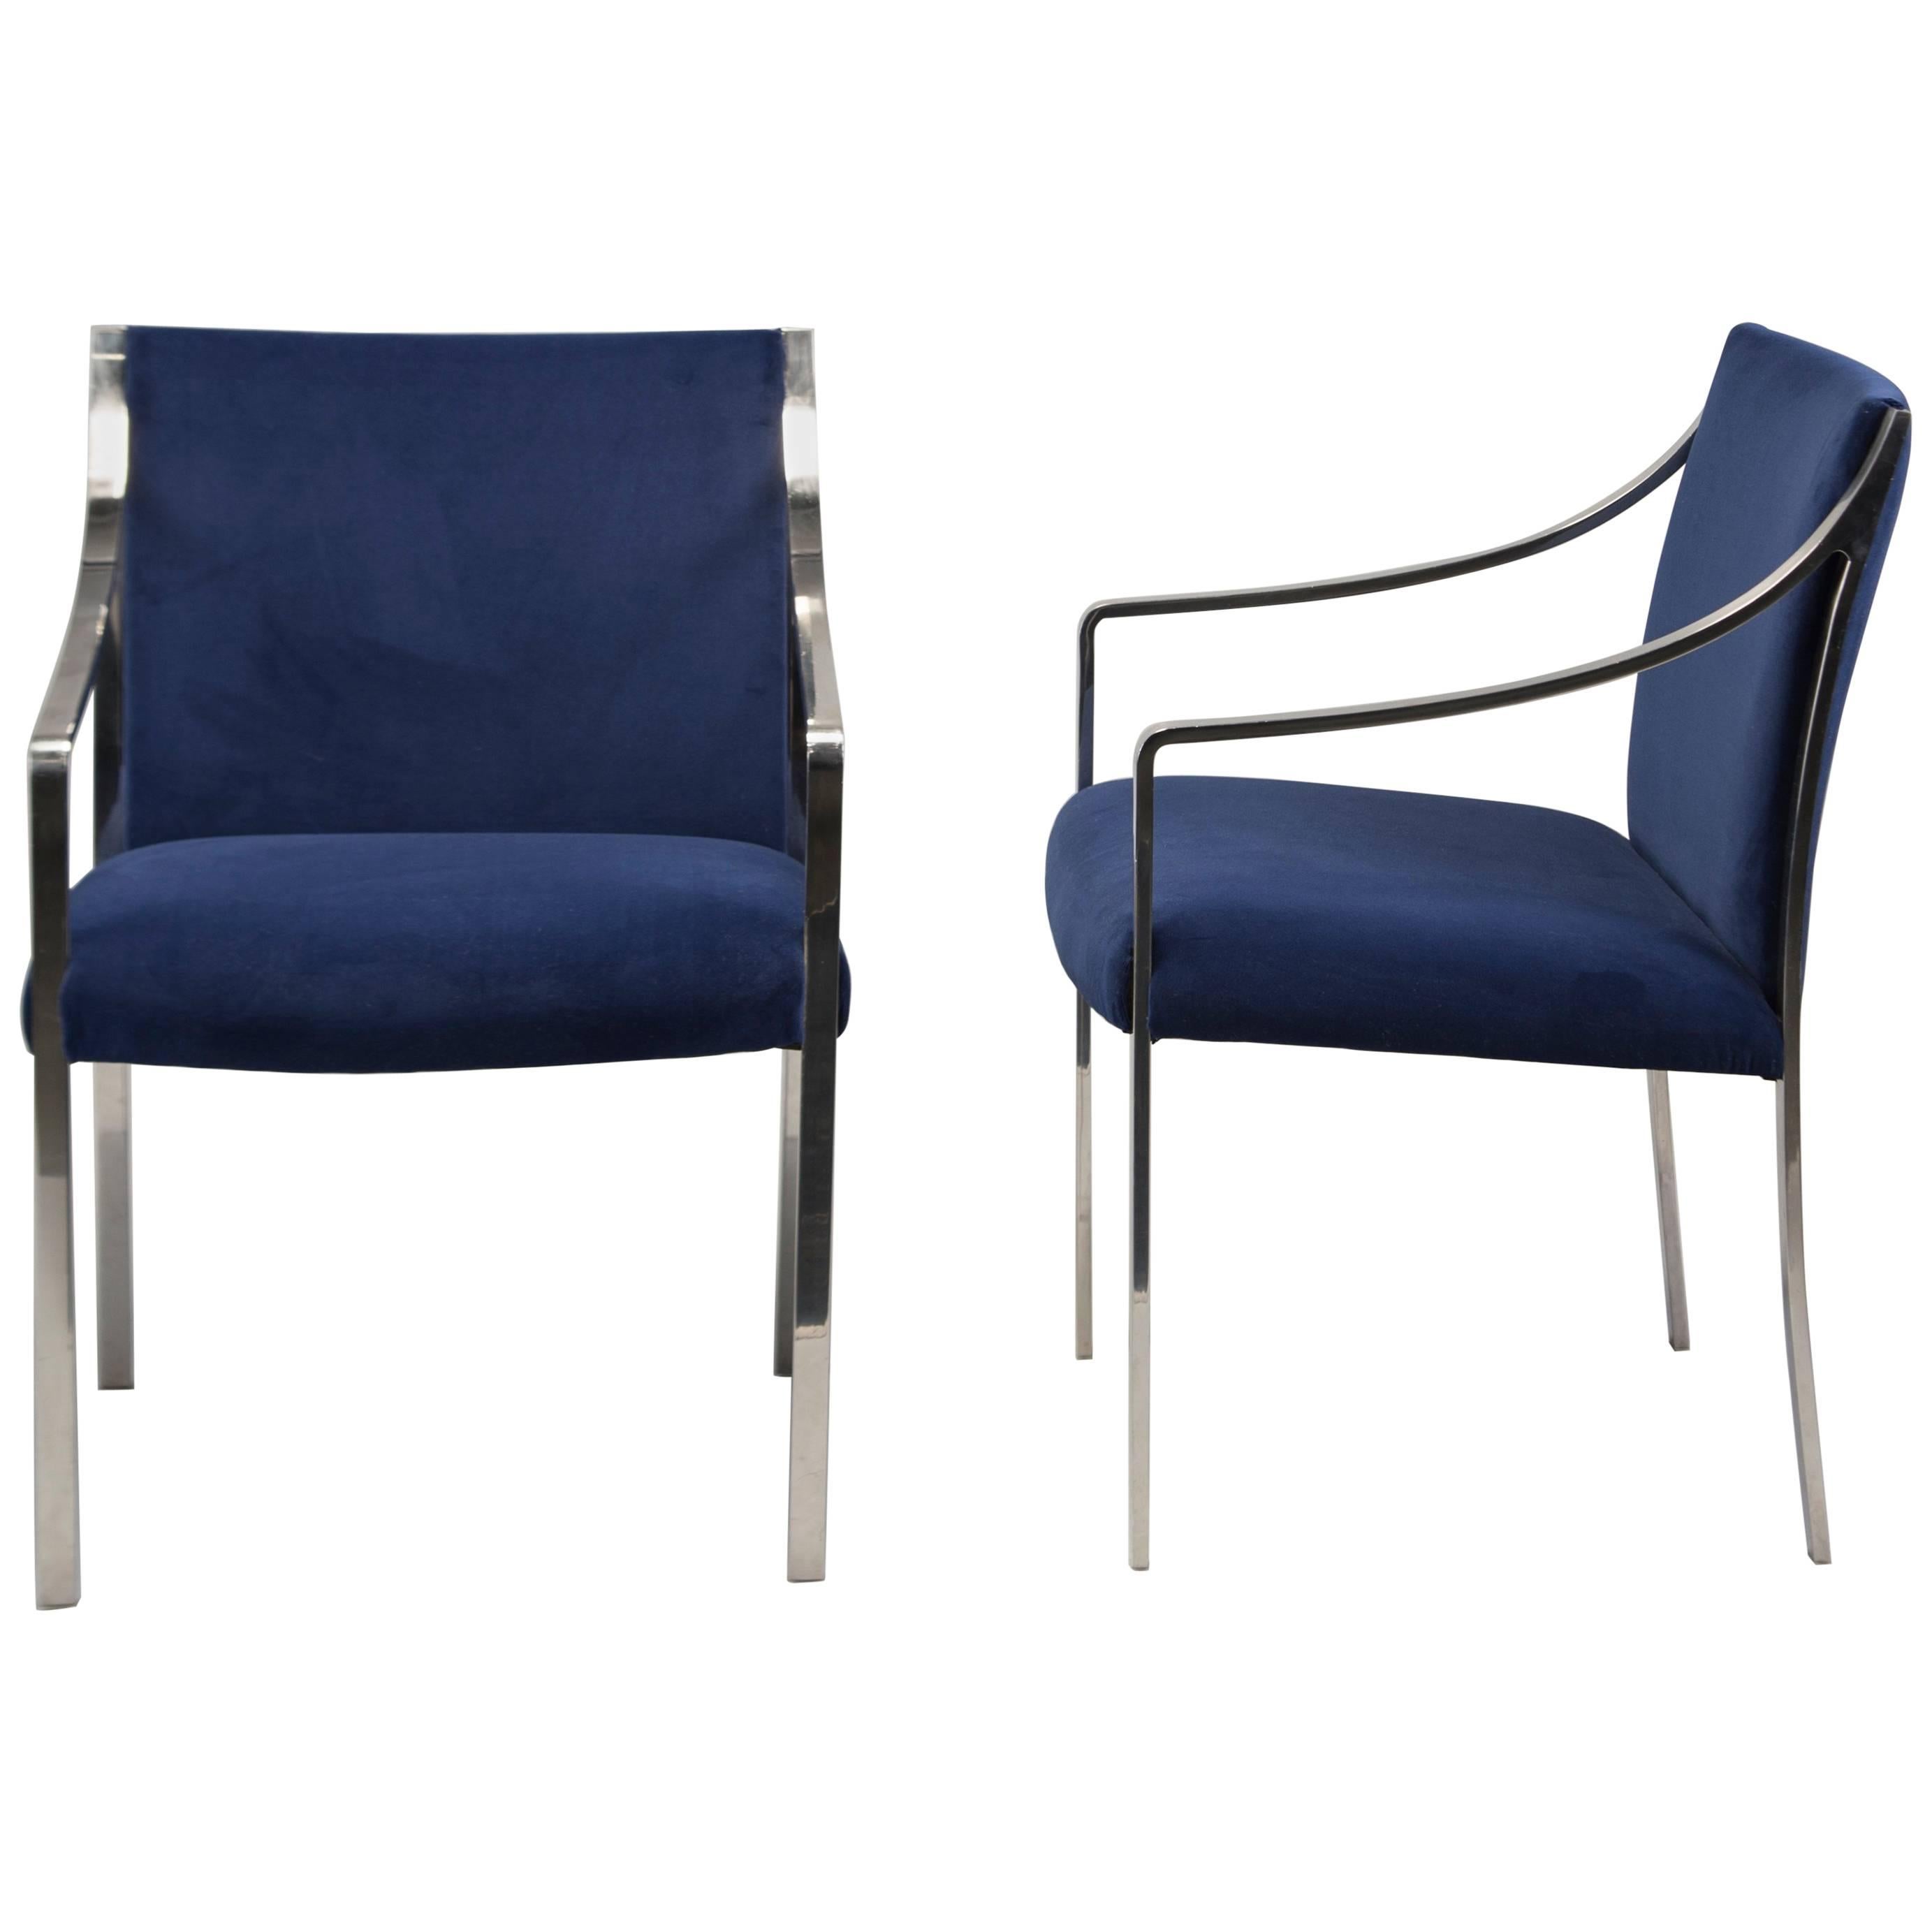 Pair of Midcentury Bert England for Stow Davis Steel Frame and Velvet Arm Chairs